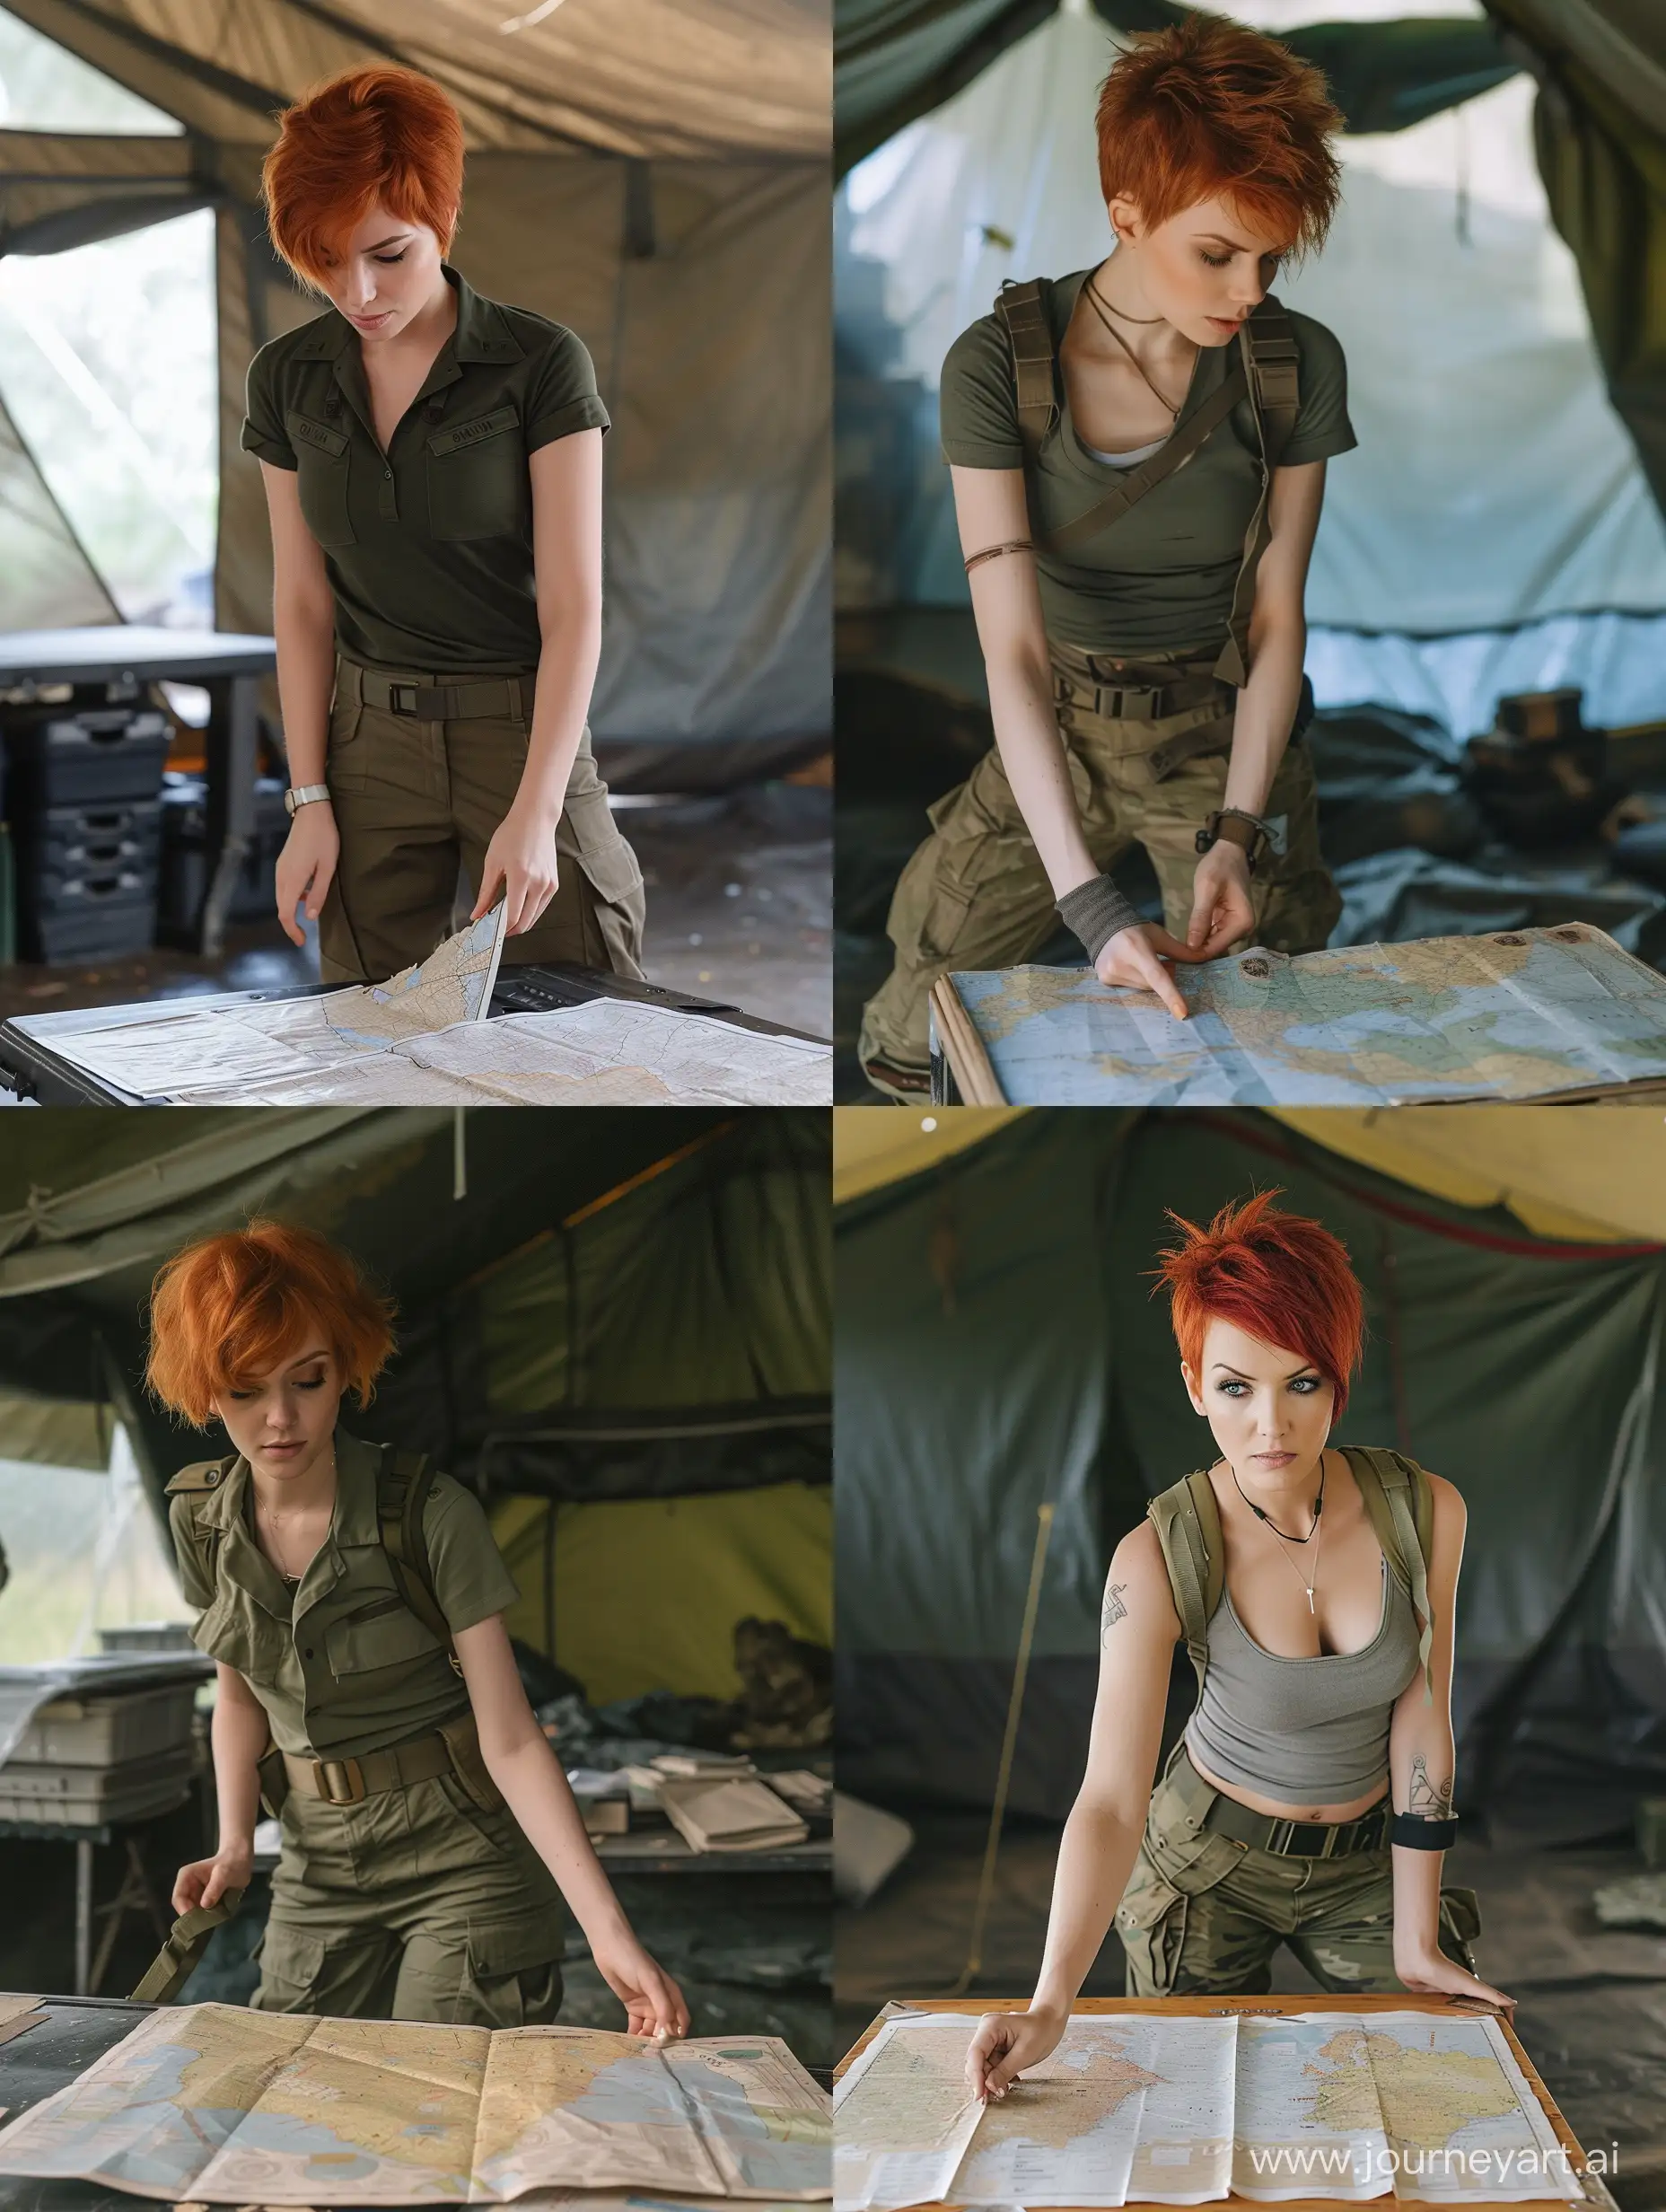  full body photo of a looking like (Tanya Adams) with short red hair, army tent environment, cargo pants, picking up map from table